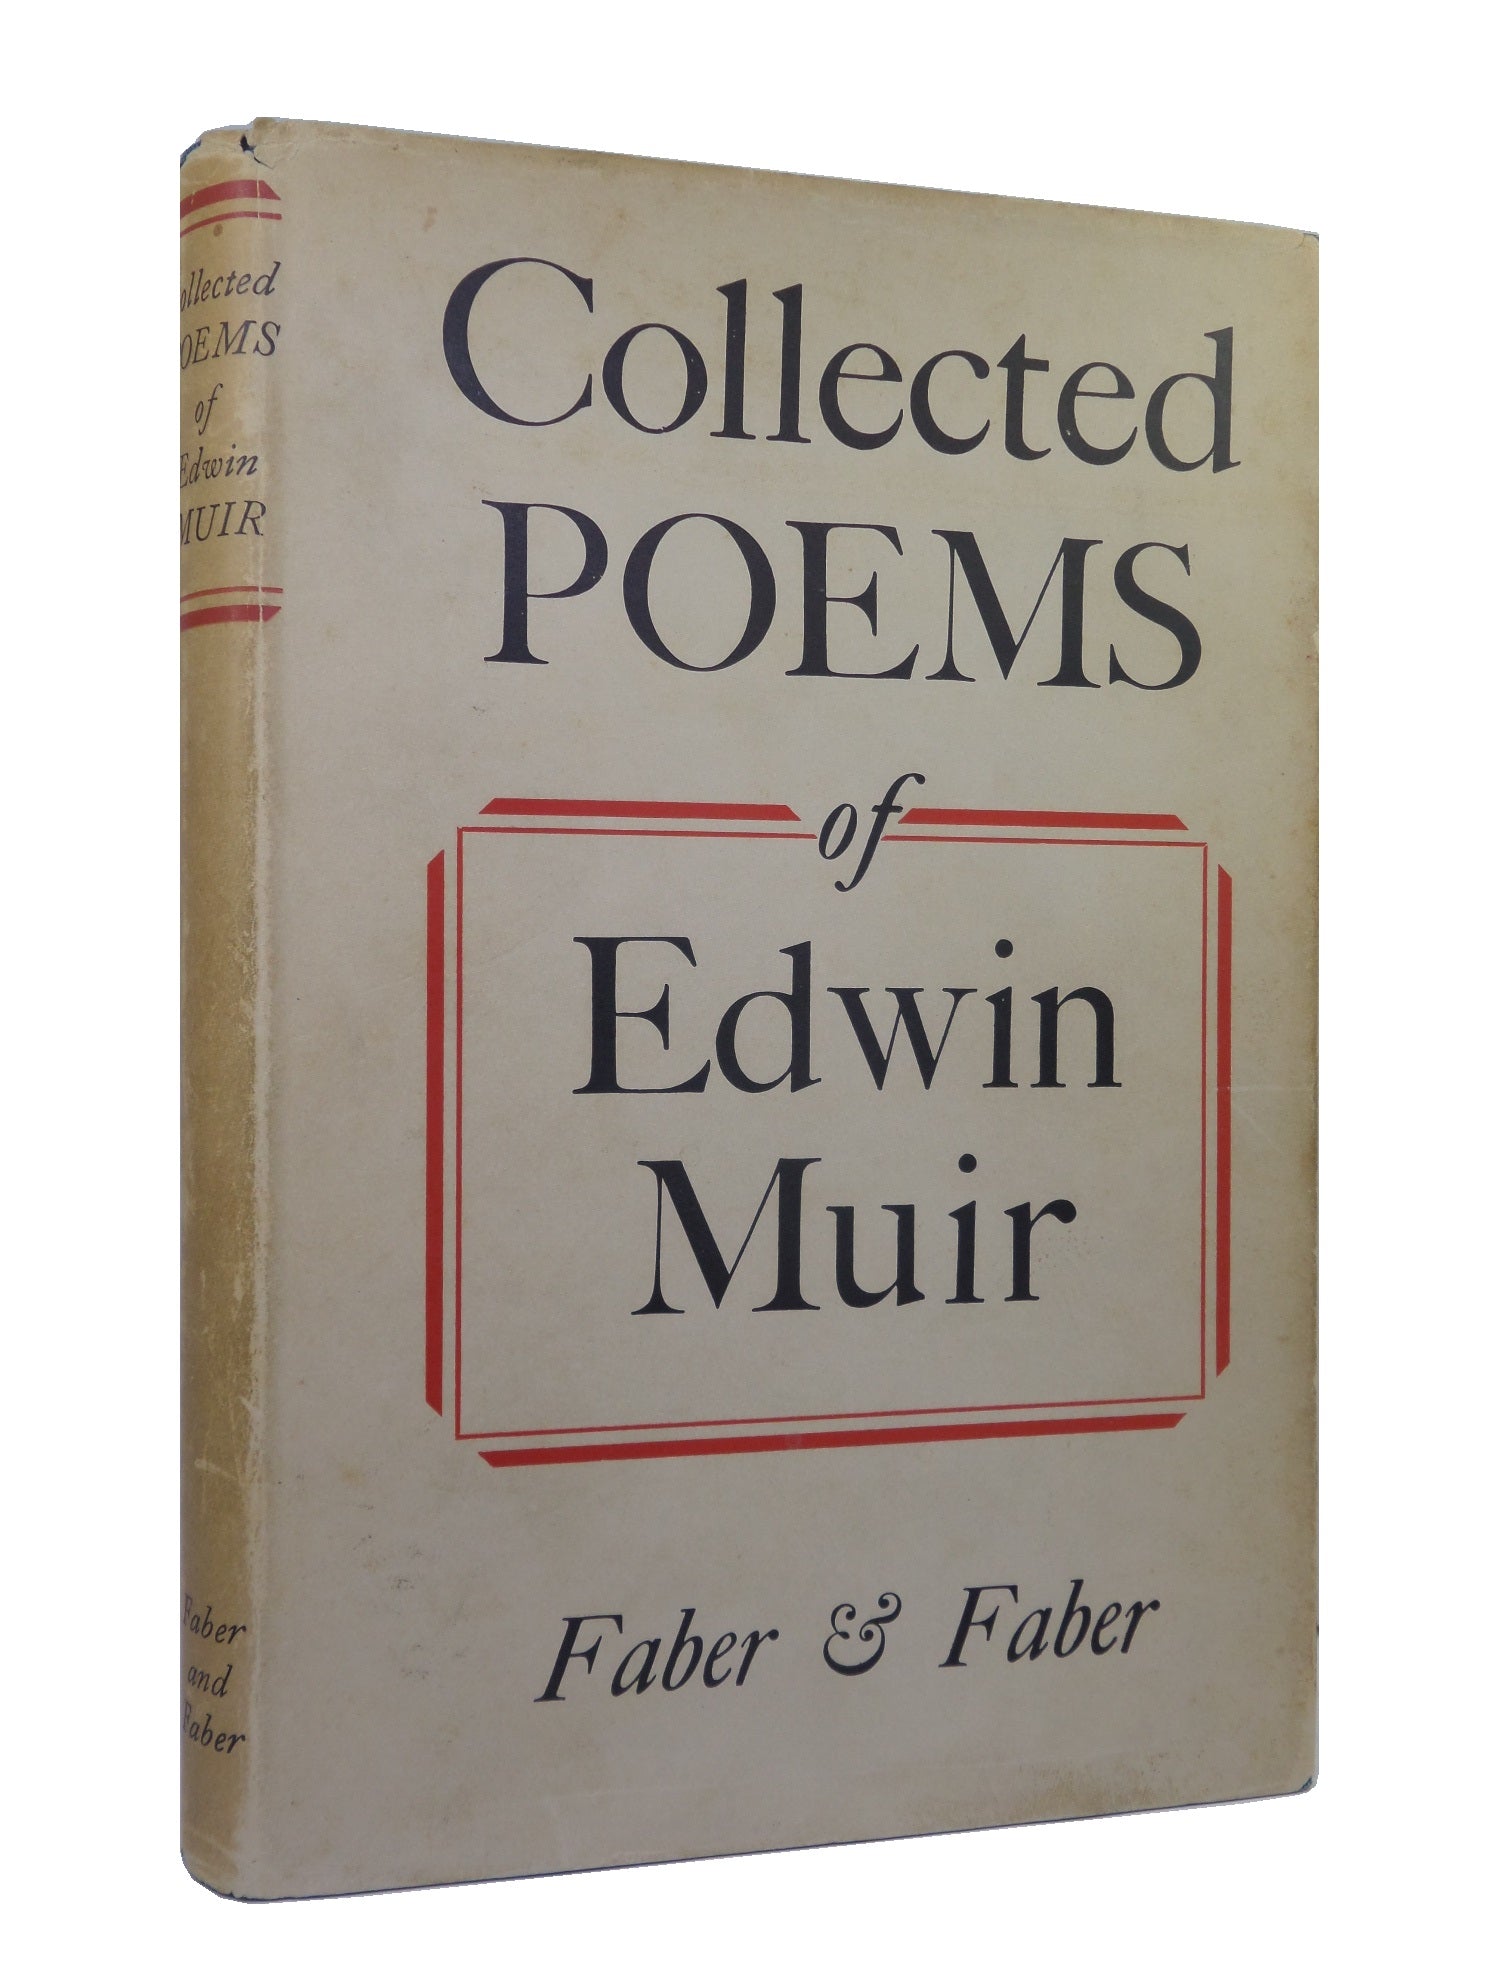 COLLECTED POEMS 1921-1951 BY EDWIN MUIR 1953 SIGNED BY AUTHOR